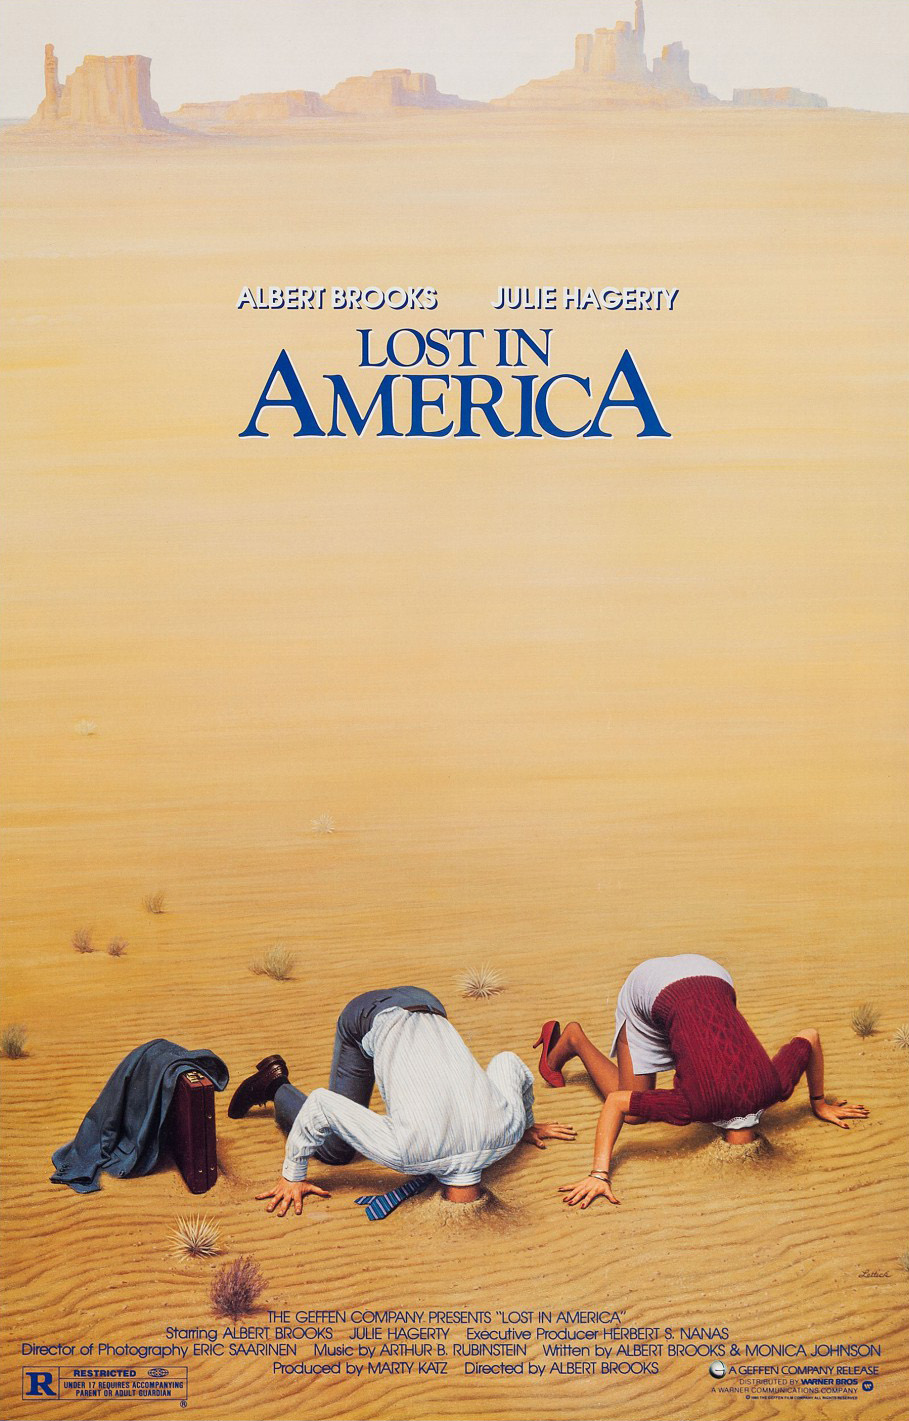 Poster for the film Lost in America